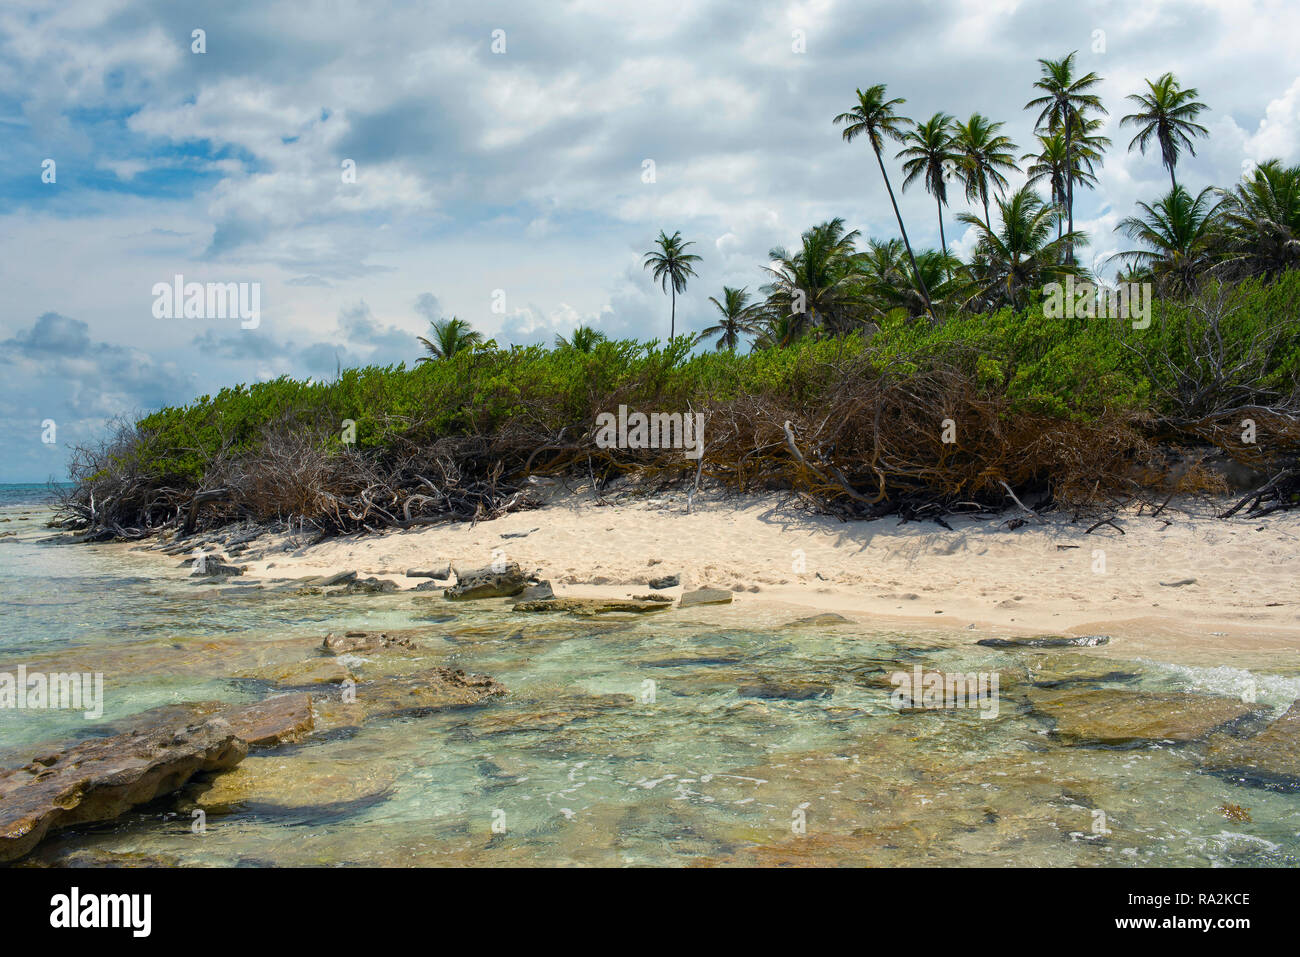 Caribbean beach with rocks, sand and palms. Johnny Cay, San Andrés island, Colombia. Oct 2018 Stock Photo